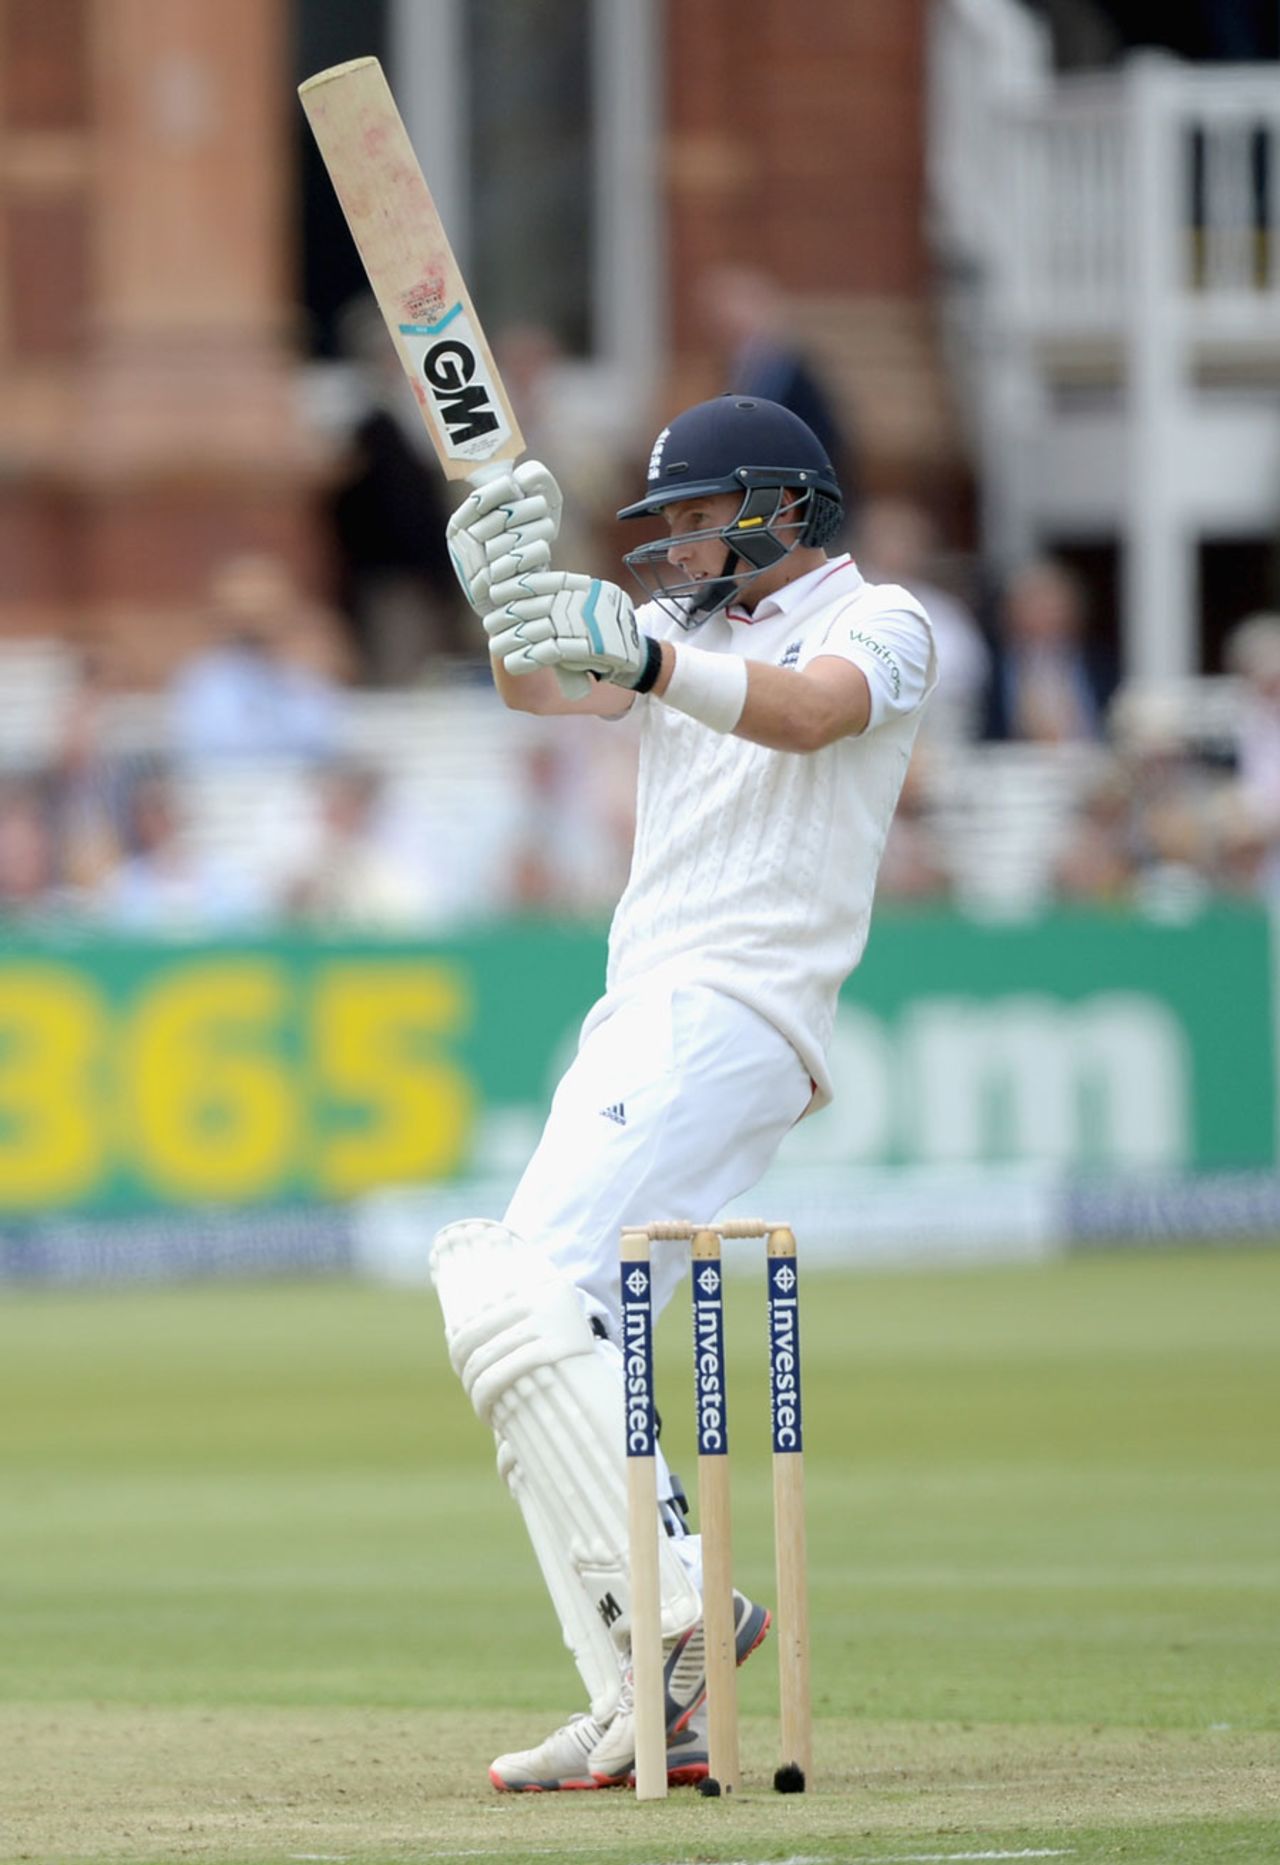 Joe Root played positively to lead a fightback, England v New Zealand, 1st Investec Test, Lord's, 1st day, May 21, 2015